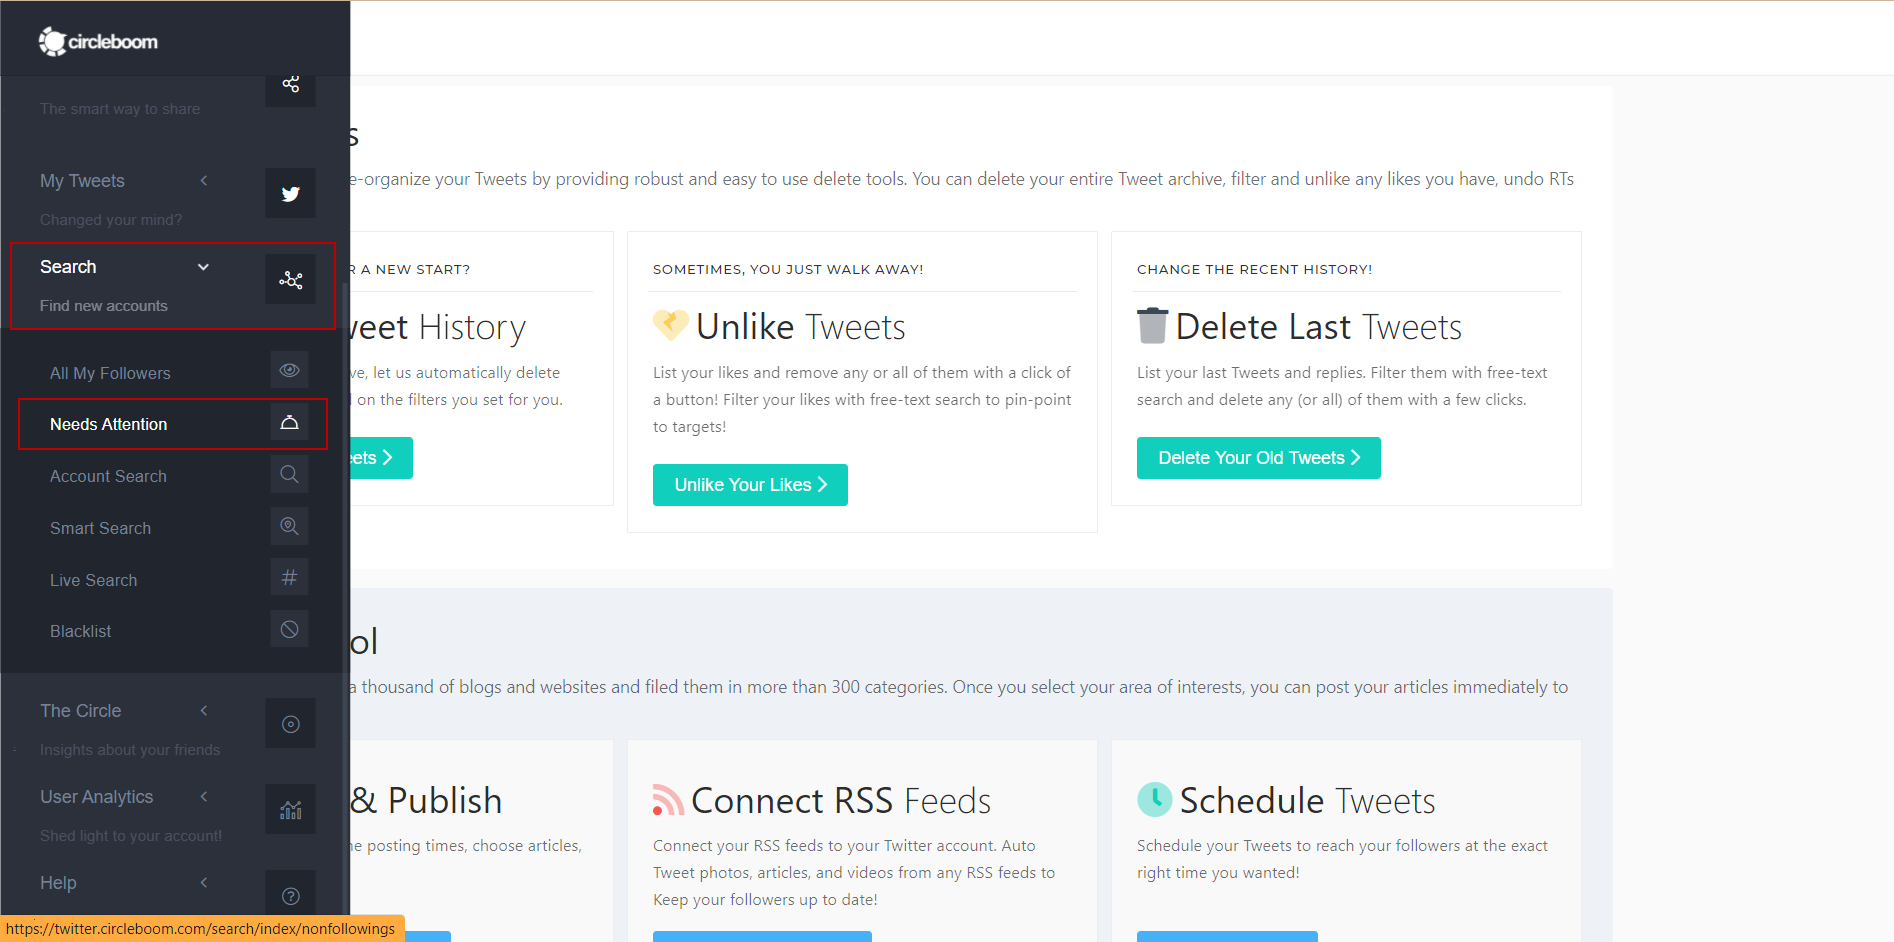 With the Twitter Follower Audit provided by Circleboom, you can quickly search and check your Twitter followers!